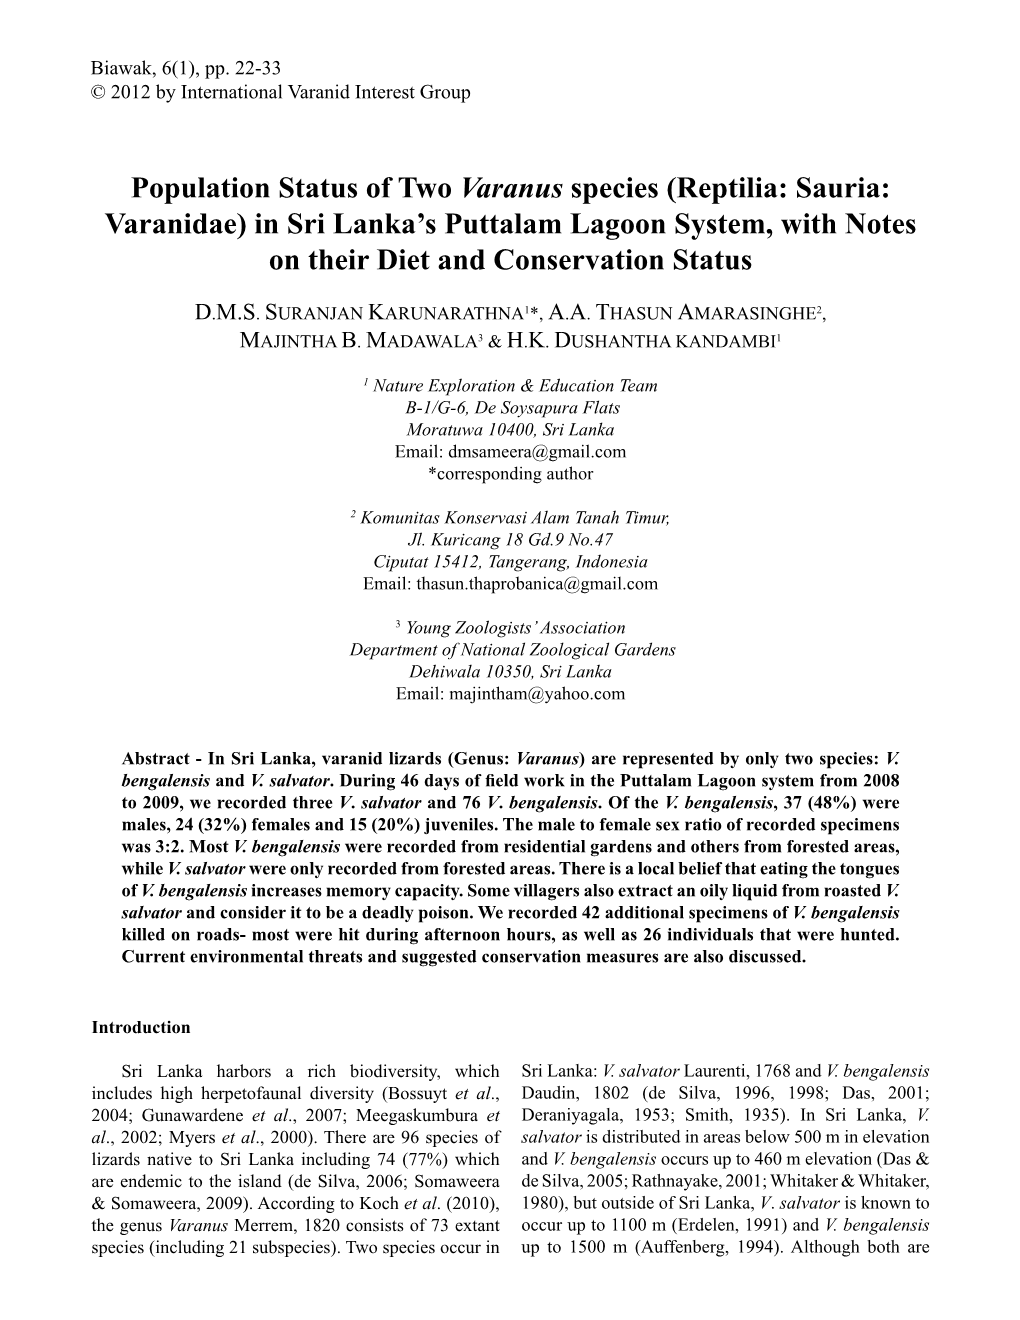 Population Status of Two Varanus Species (Reptilia: Sauria: Varanidae) in Sri Lanka’S Puttalam Lagoon System, with Notes on Their Diet and Conservation Status